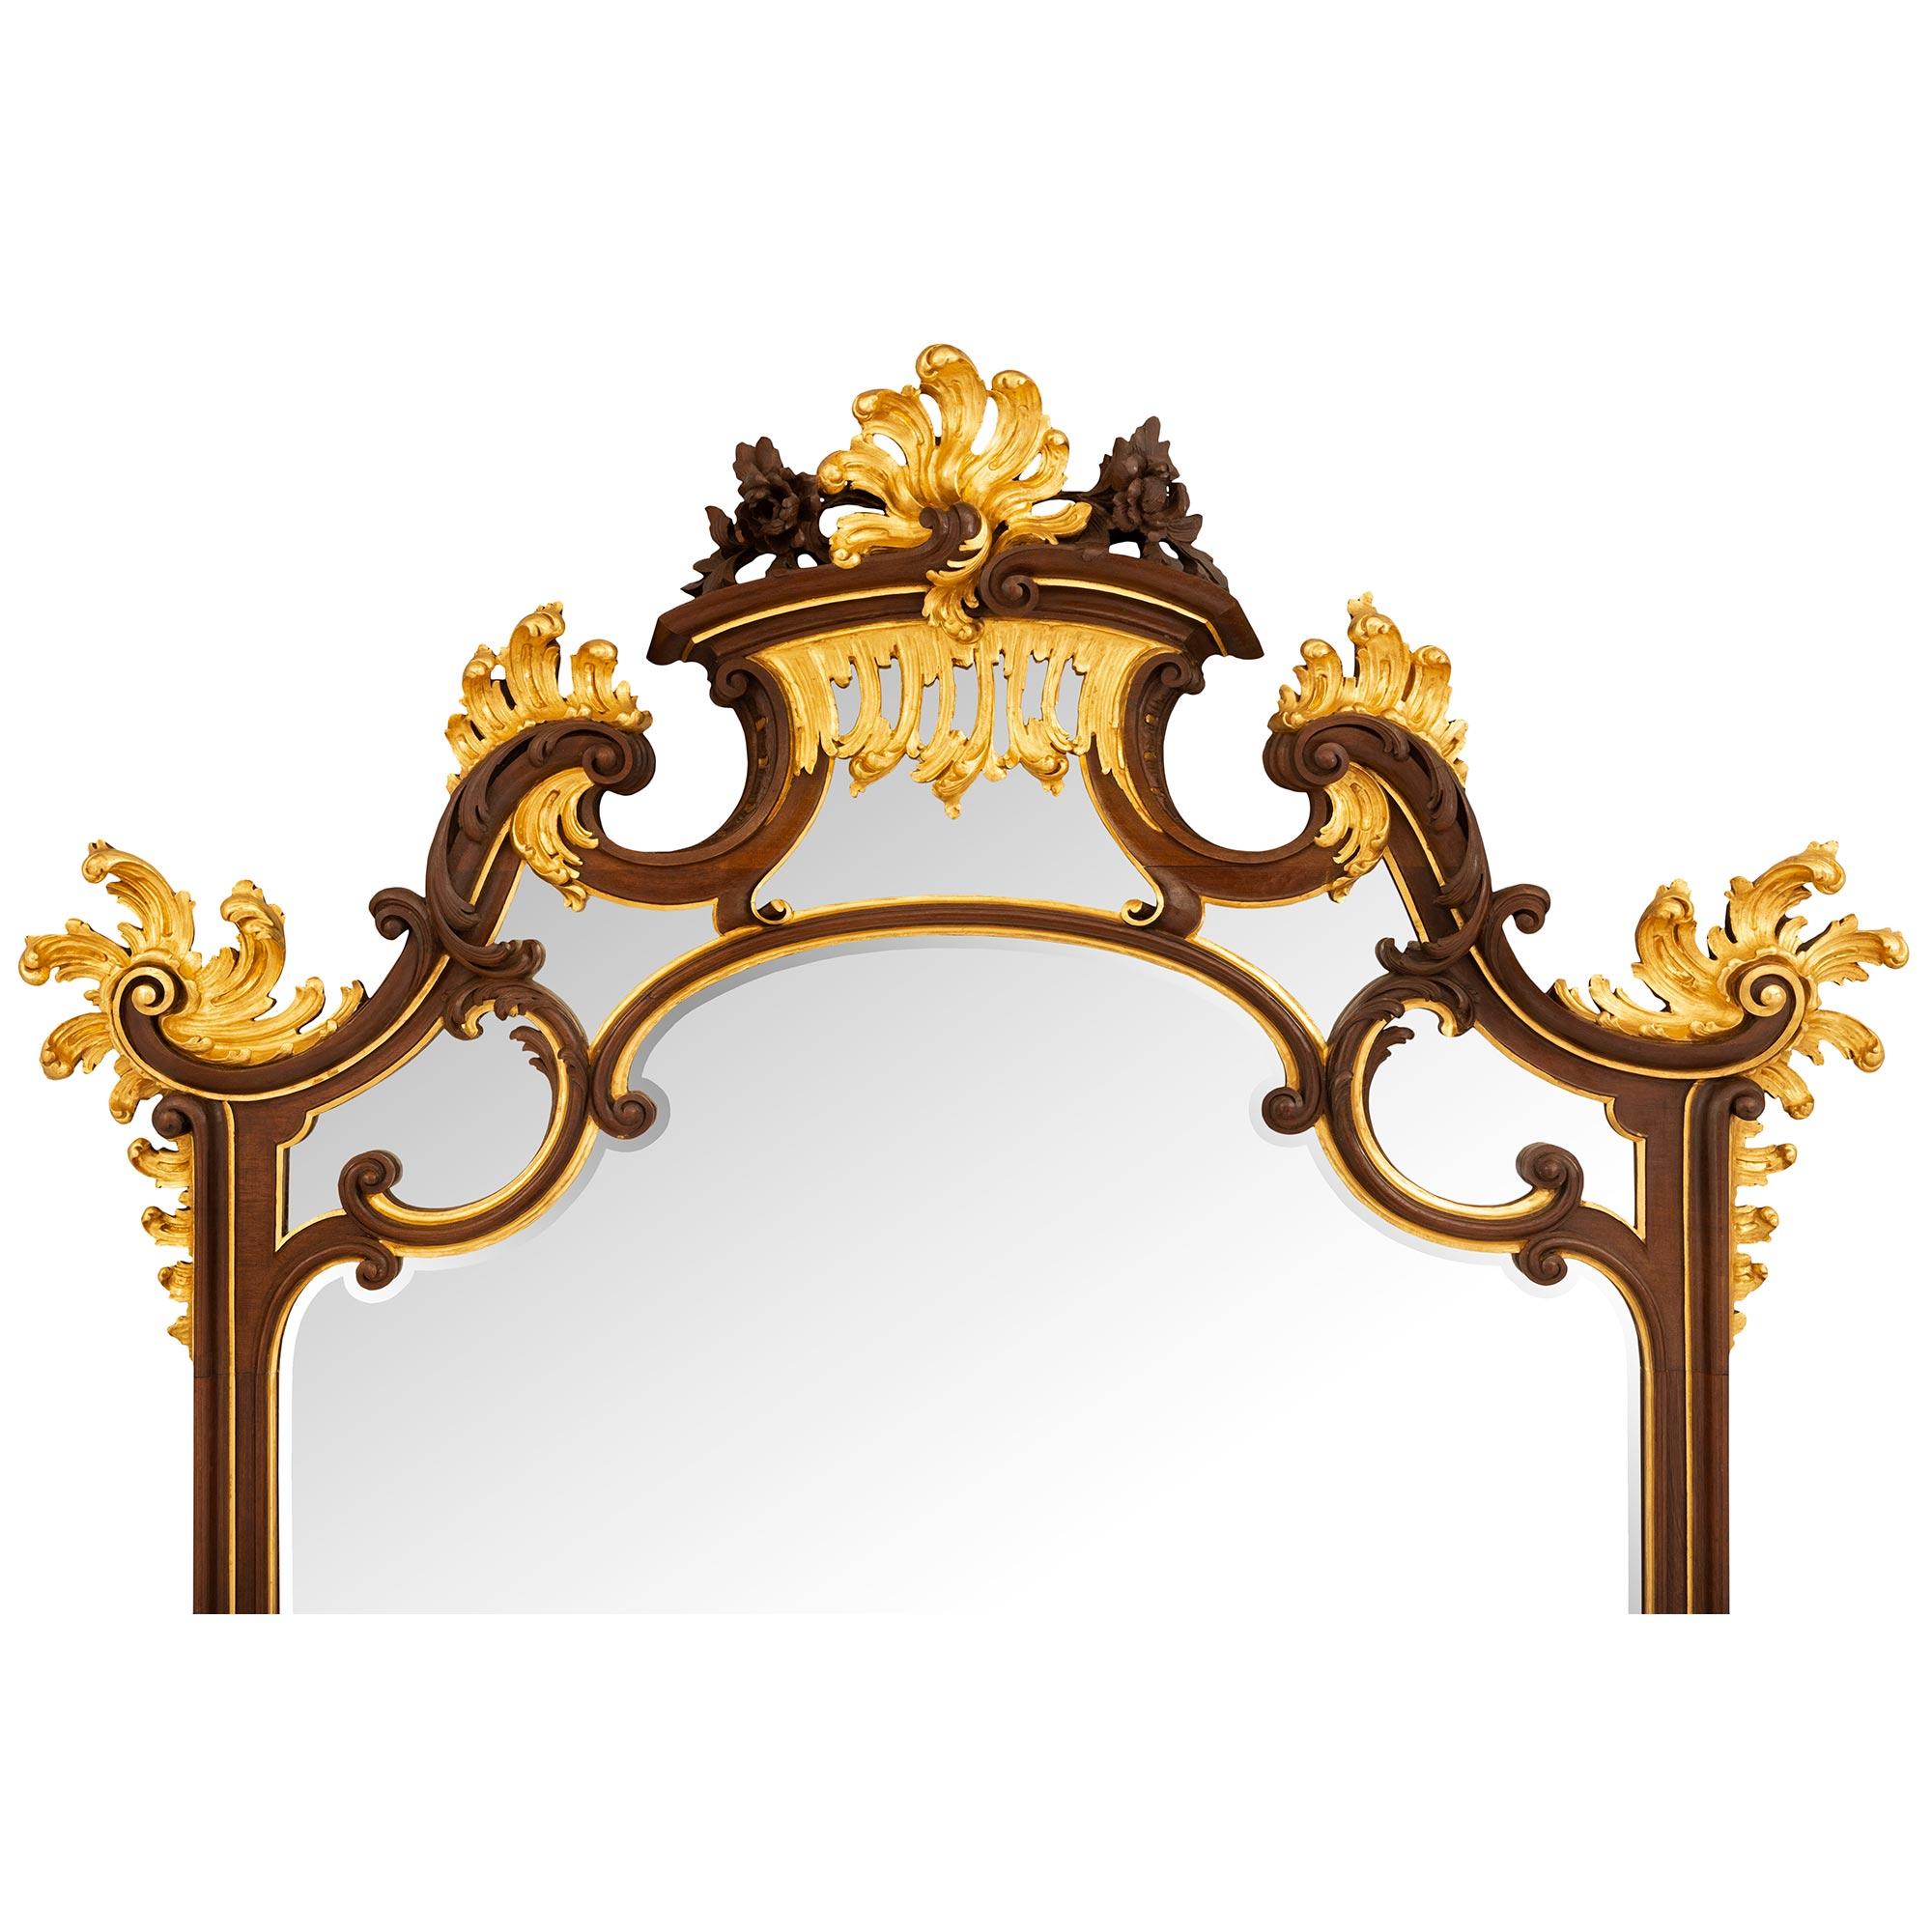 French 19th Century Belle Époque Period Console And Mirror Attributed To Linke In Good Condition For Sale In West Palm Beach, FL